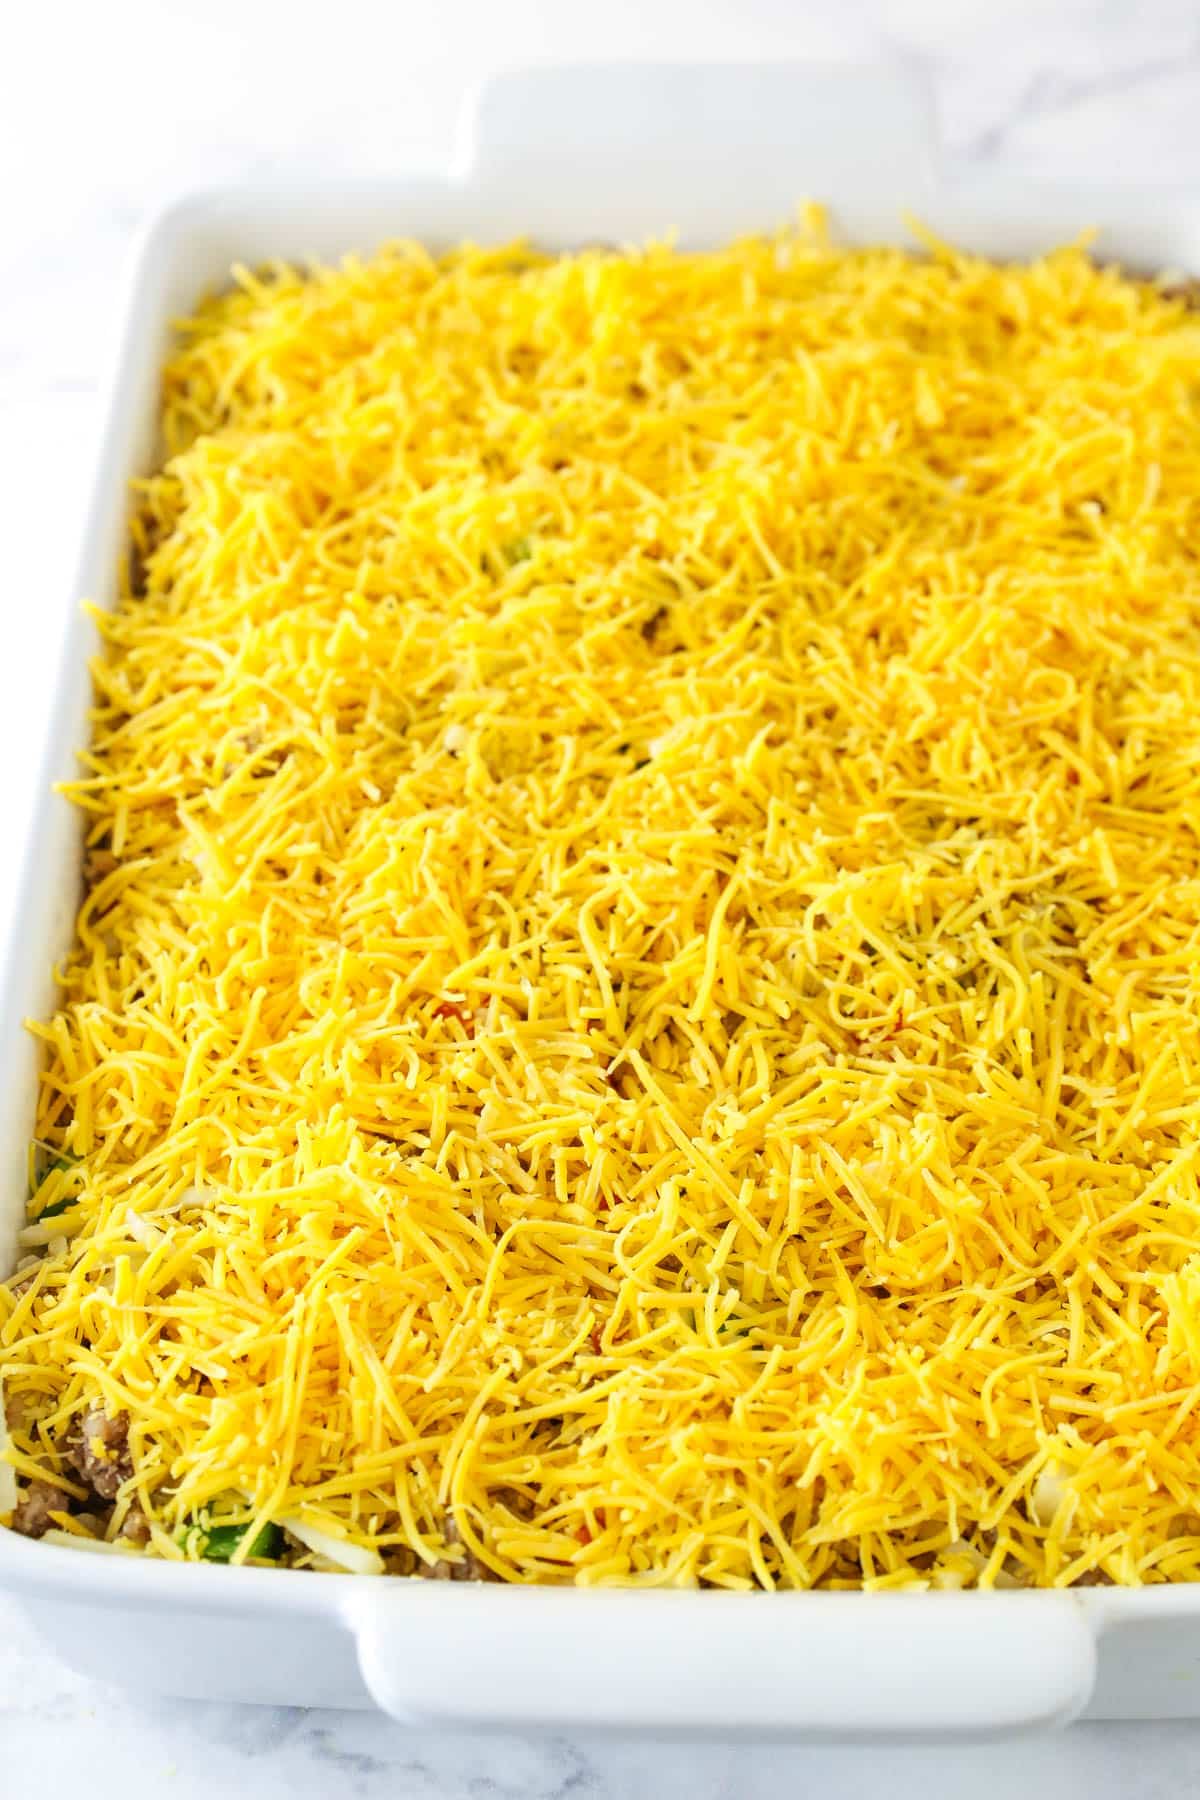 A layer of cheddar on top of the breakfast casserole - ready for baking